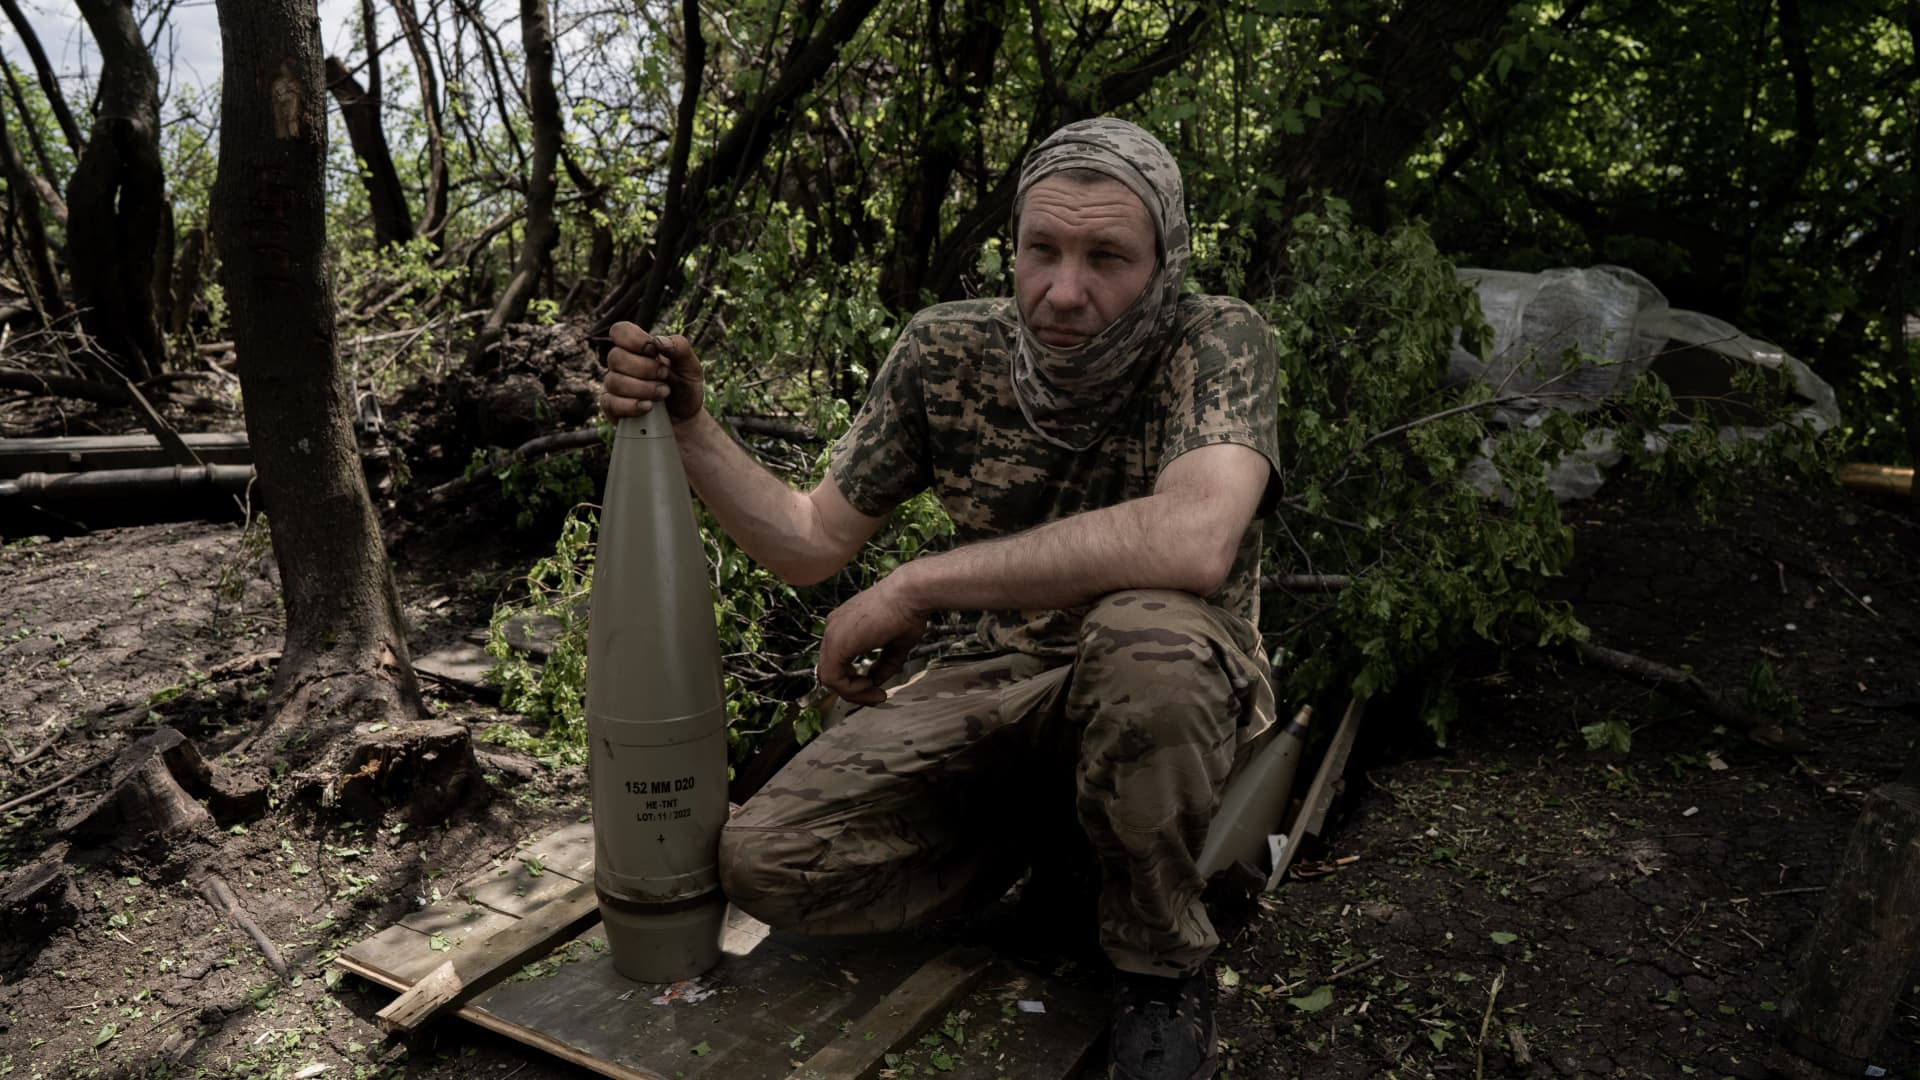 57th Brigade Artillery Regiment of the Ukrainian Army in the second front line during a field firefight while the Russia-Ukraine war continues in Chasiv Yar, Donetsk Oblast, Ukraine on May 15, 2023.